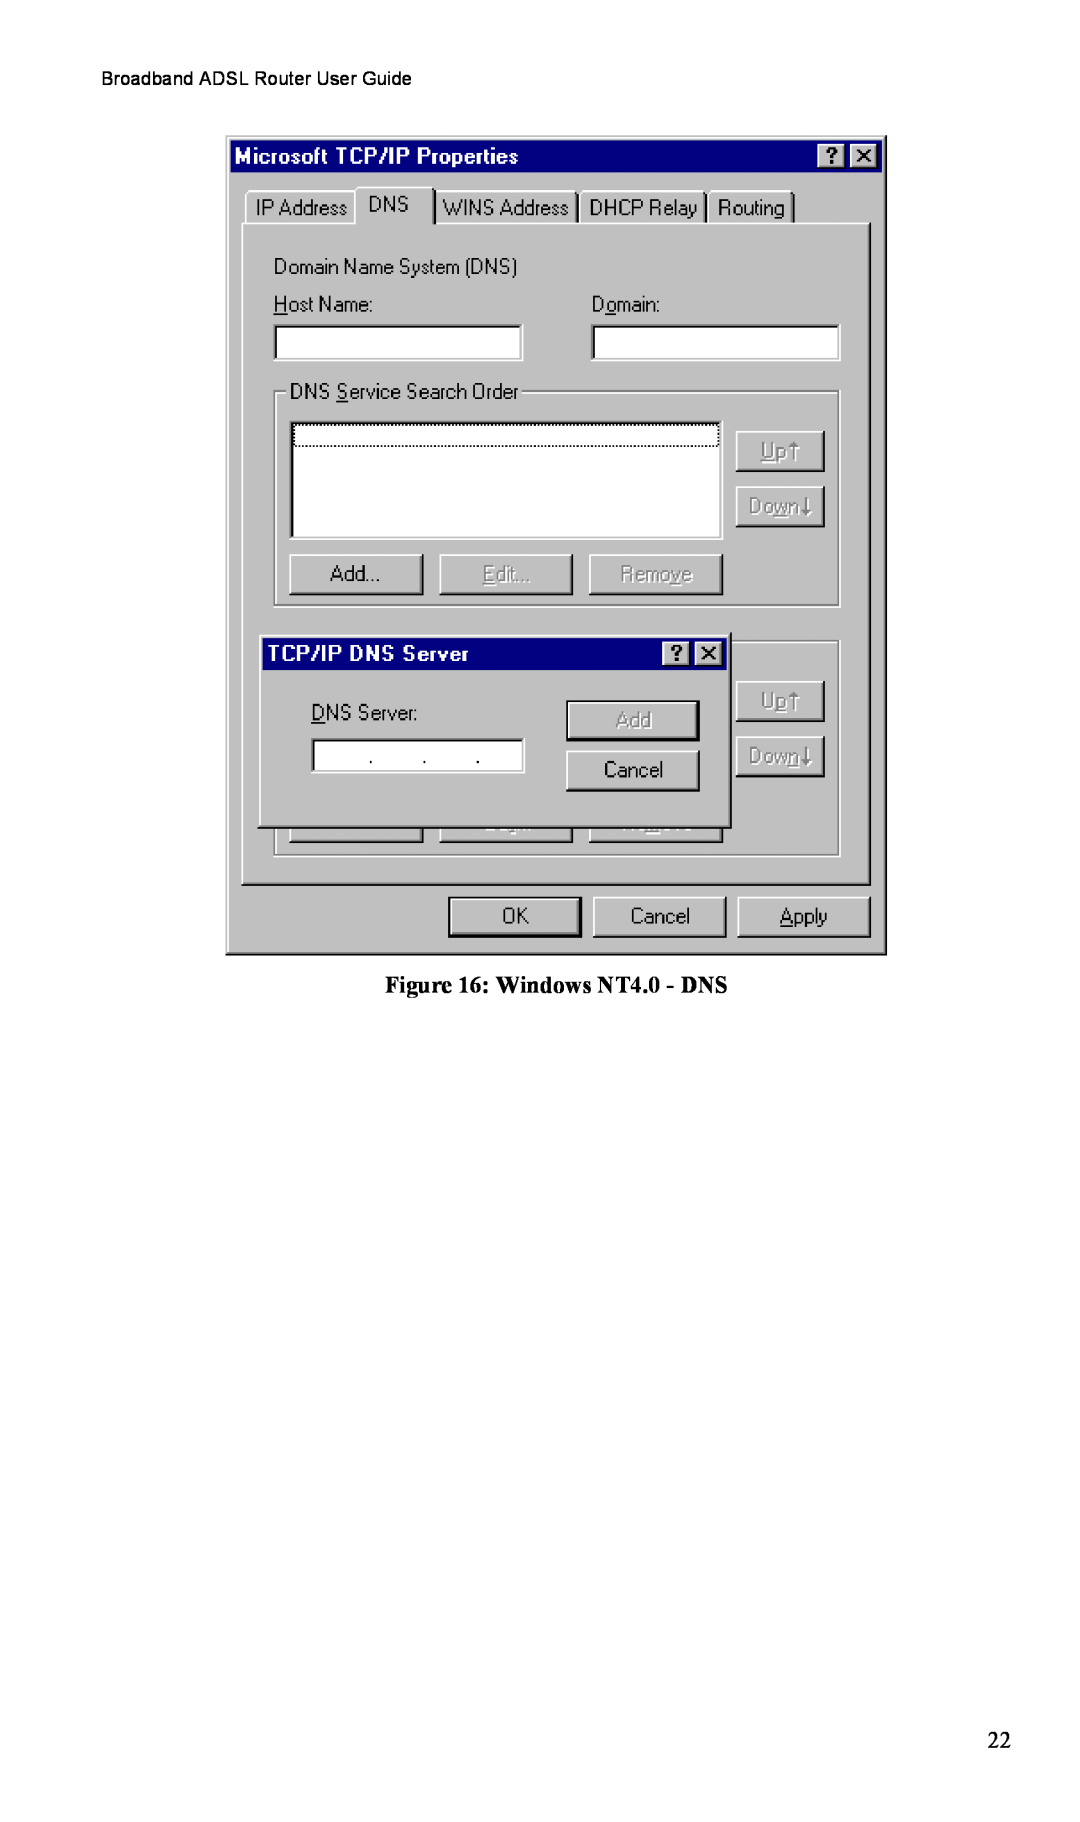 TRENDnet TW100-BRM504 manual Windows NT4.0 - DNS, Broadband ADSL Router User Guide 